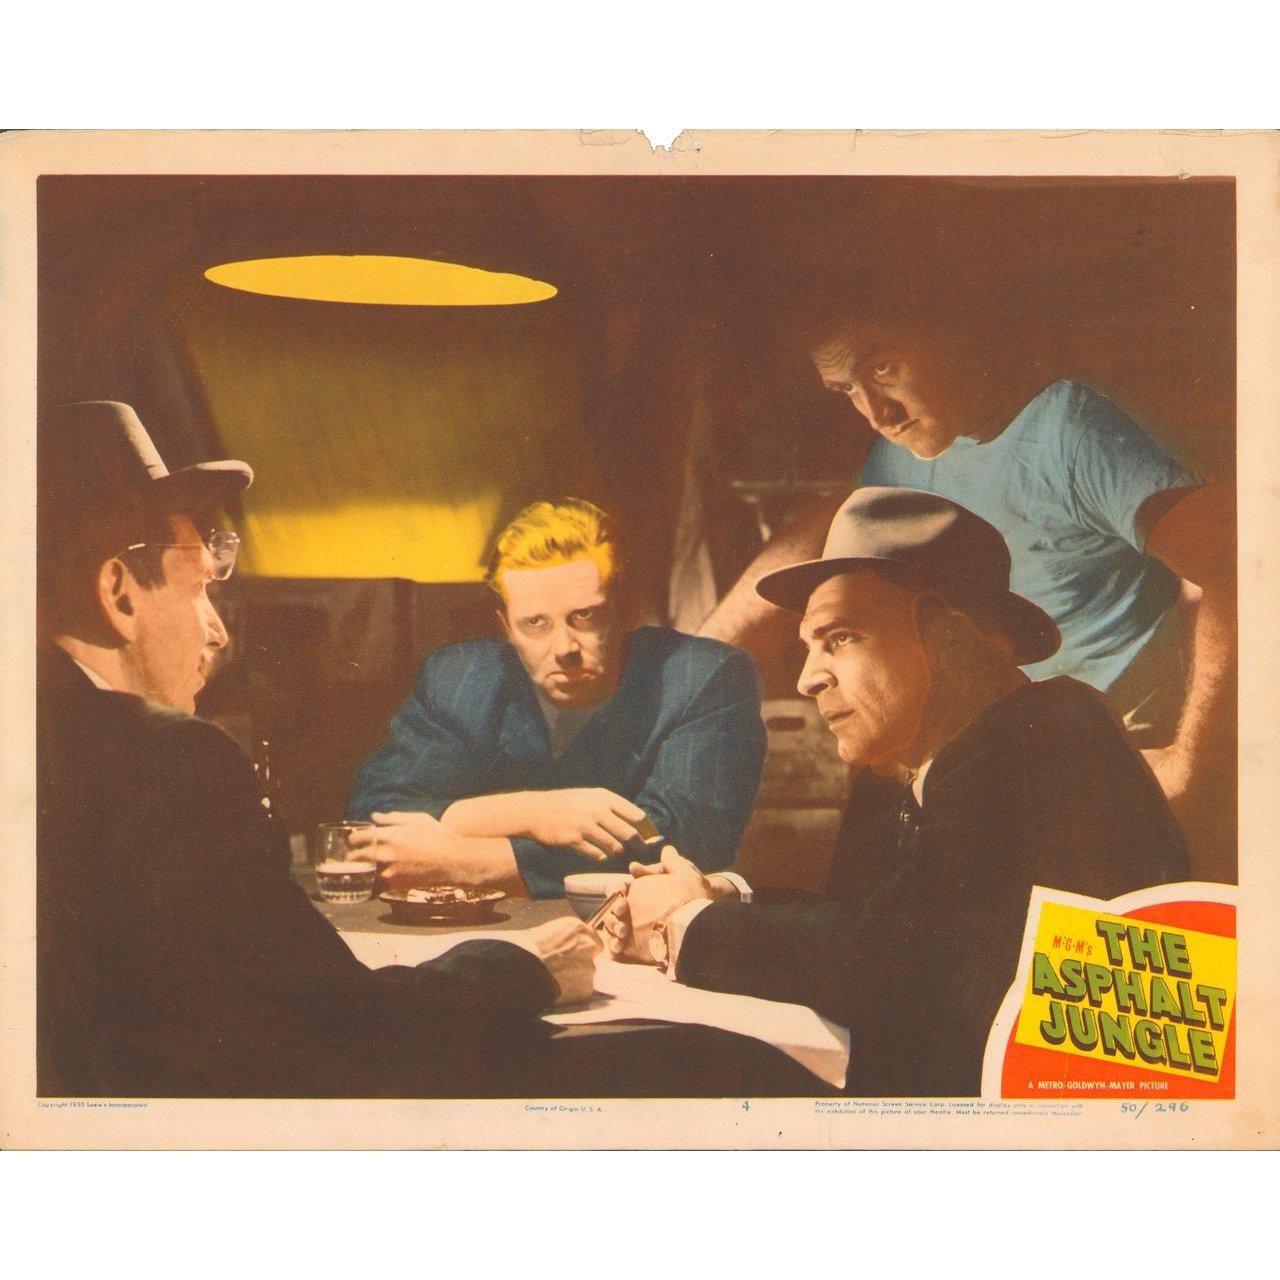 Original 1950 U.S. scene card for the film The Asphalt Jungle directed by John Huston with Marilyn Monroe / Sterling Hayden / Louis Calhern / Jean Hagen / James Whitmore. Very Good-Fine condition, border damage. Please note: the size is stated in